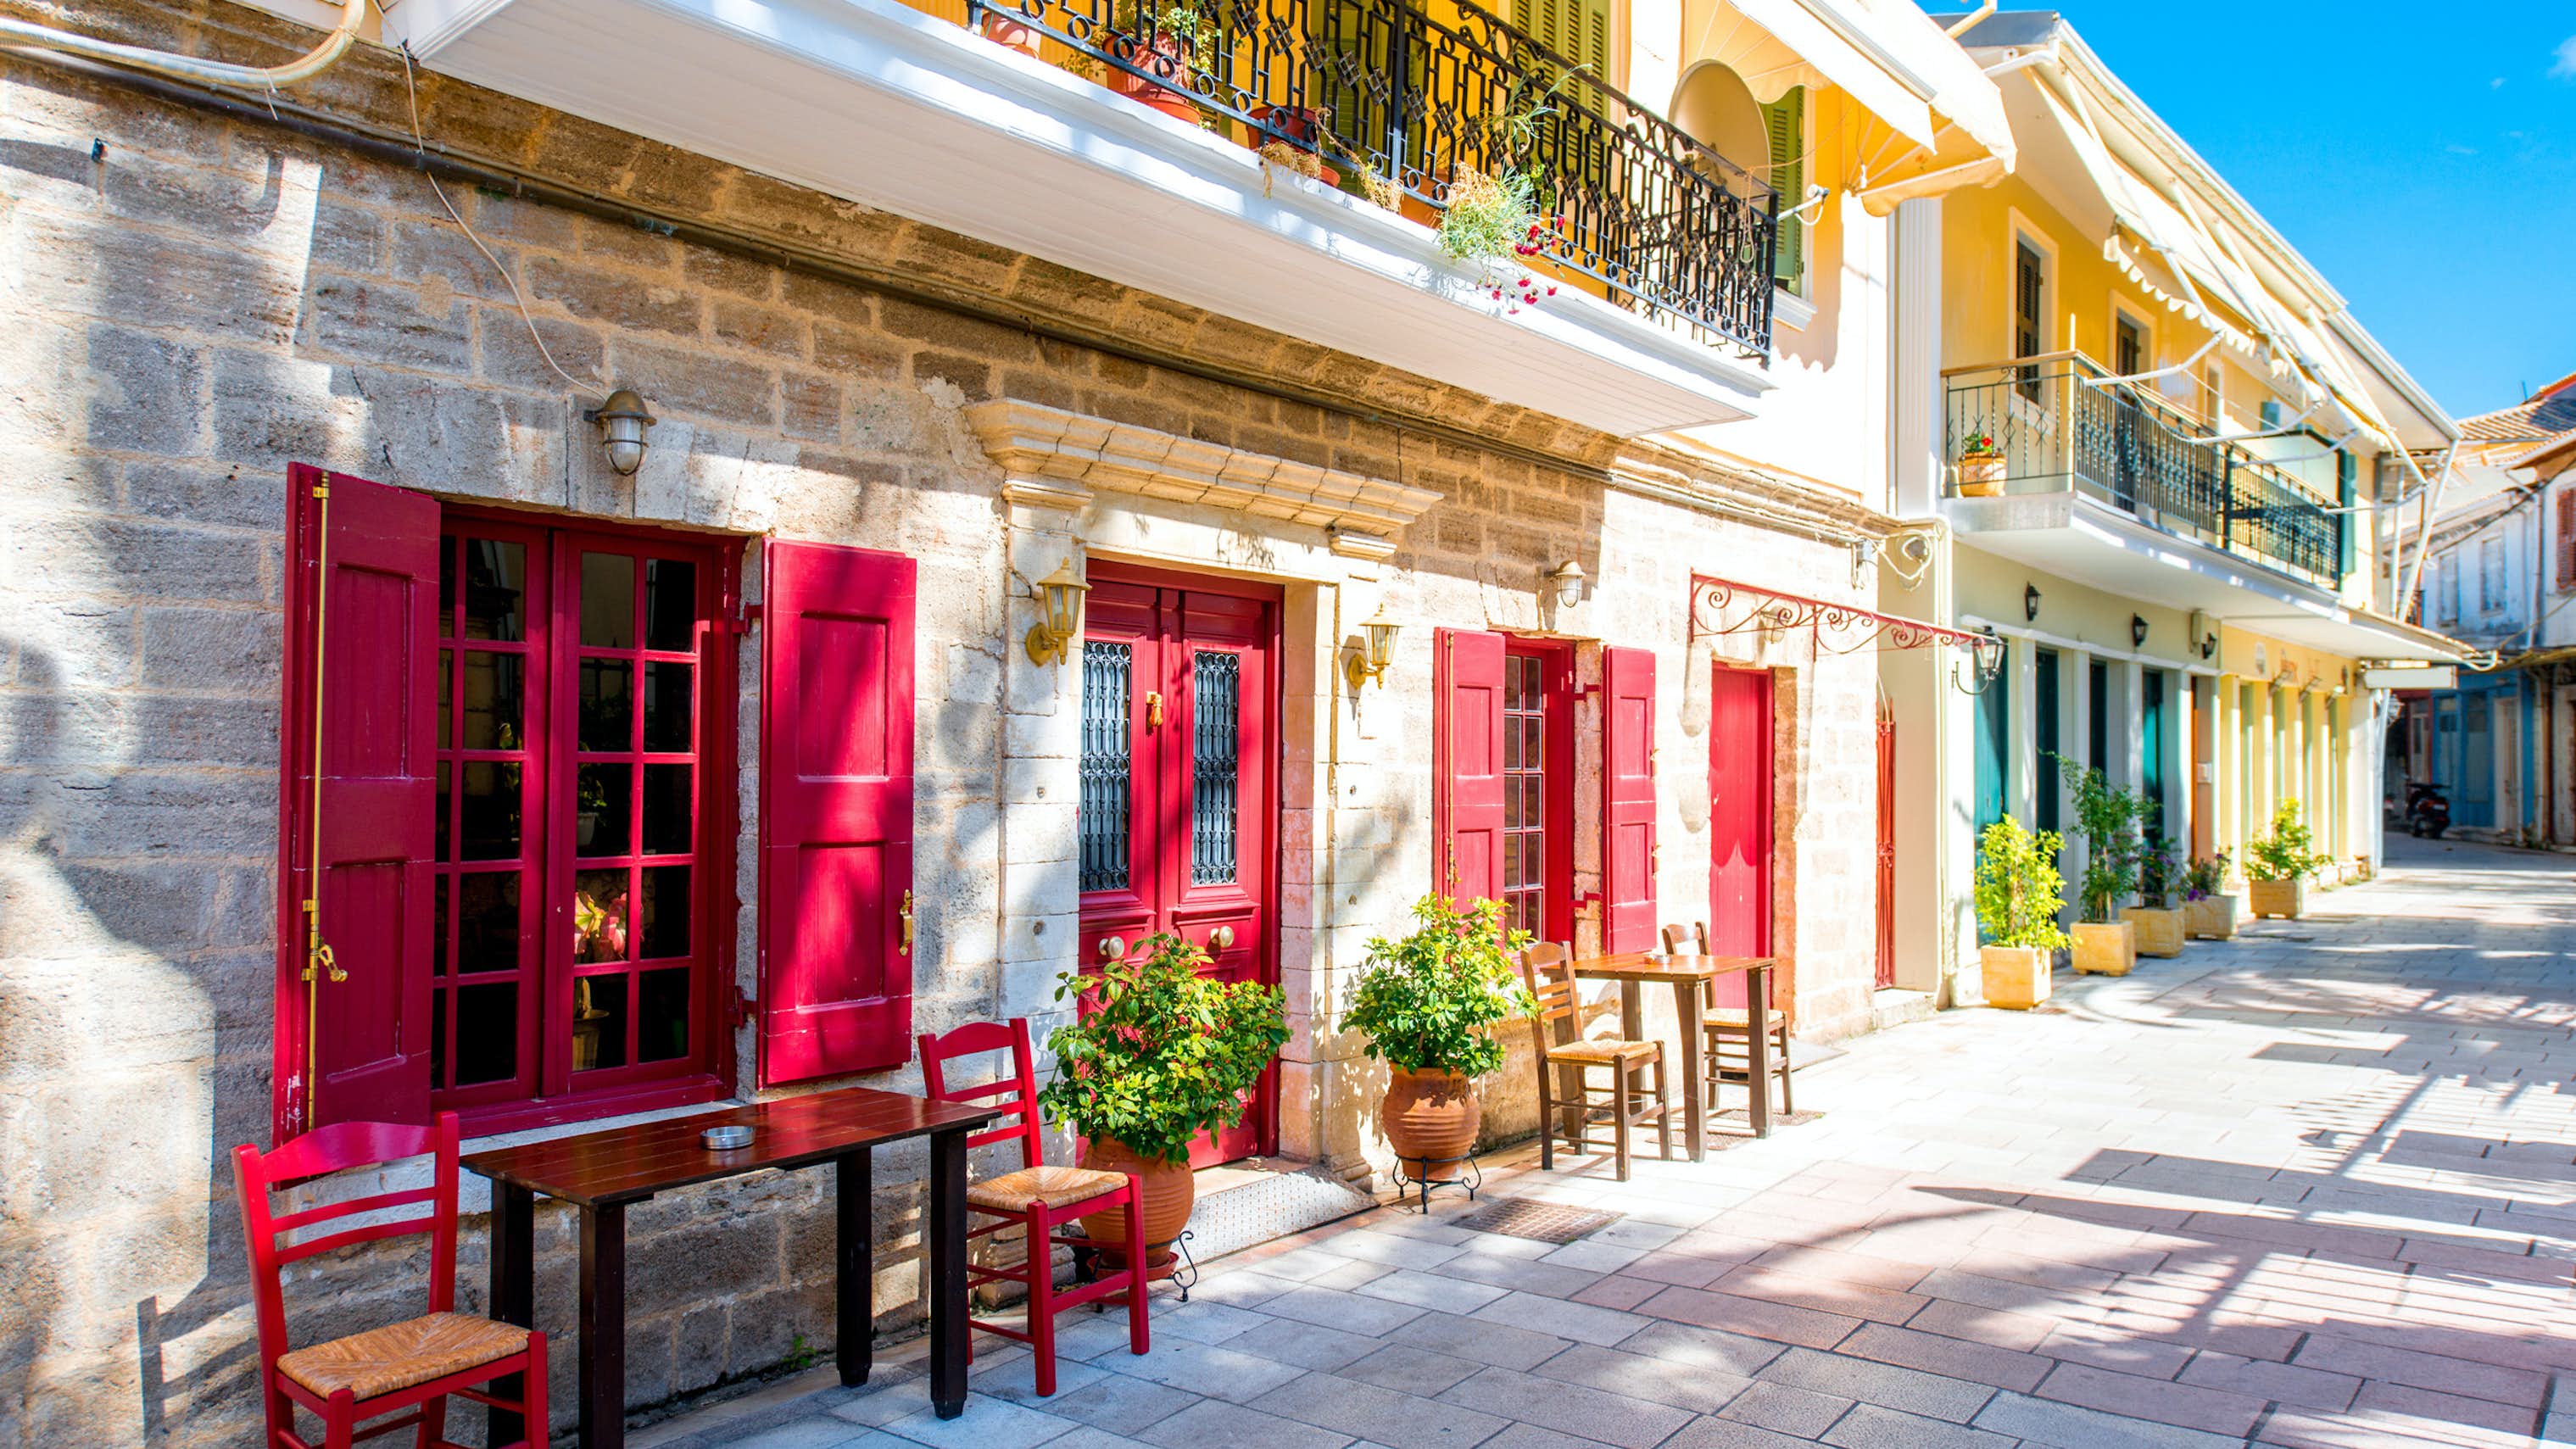 Yacht Charter Ionian Islands - Levkas, Ionian Islands, bright red doors on quiet street with small tables